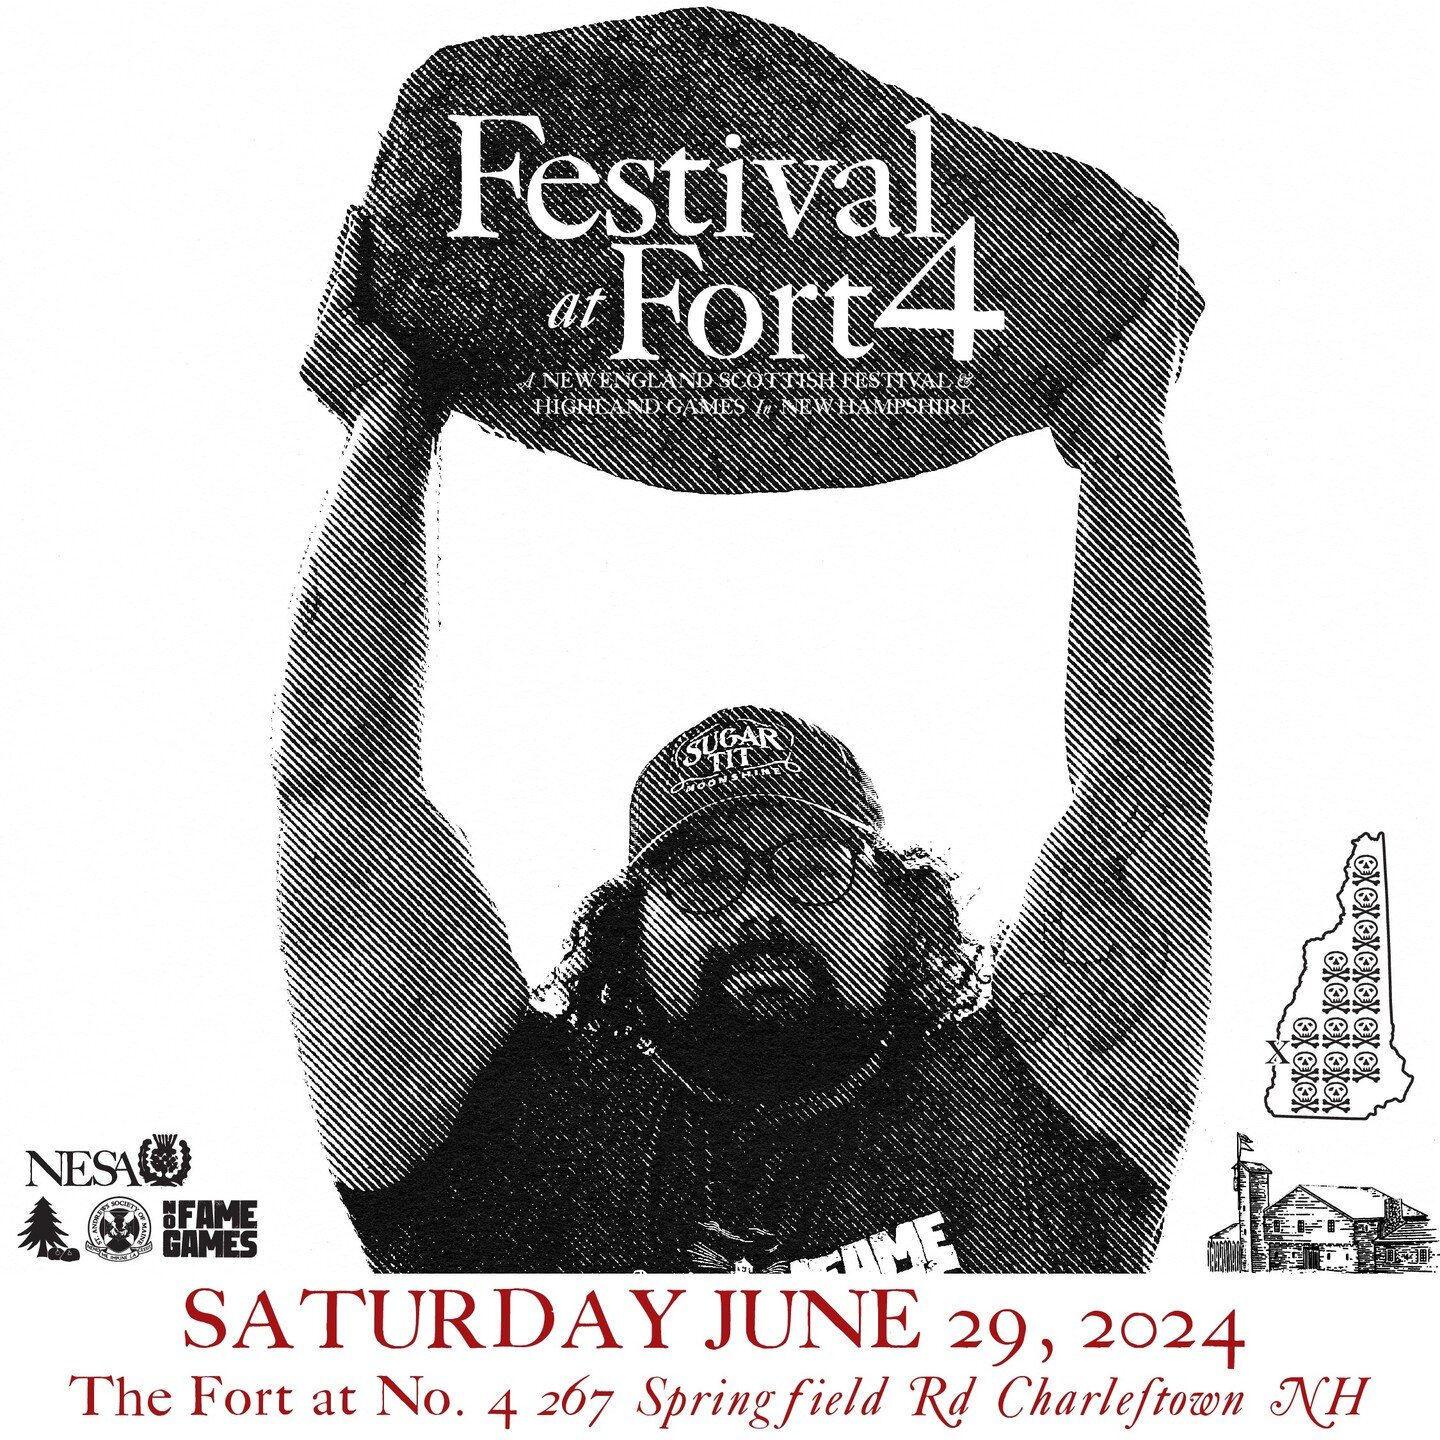 Come see The Inaugural Fort 4 Stones of Strength at The Festival At Fort 4!
HIstory will Be Made!
Saturday June 29,2024.
Get your tickets today!
#highlandgames #festivalatfort4 #stonelifting #pipesanddrums #highalndfestival #albannach #scottishherita